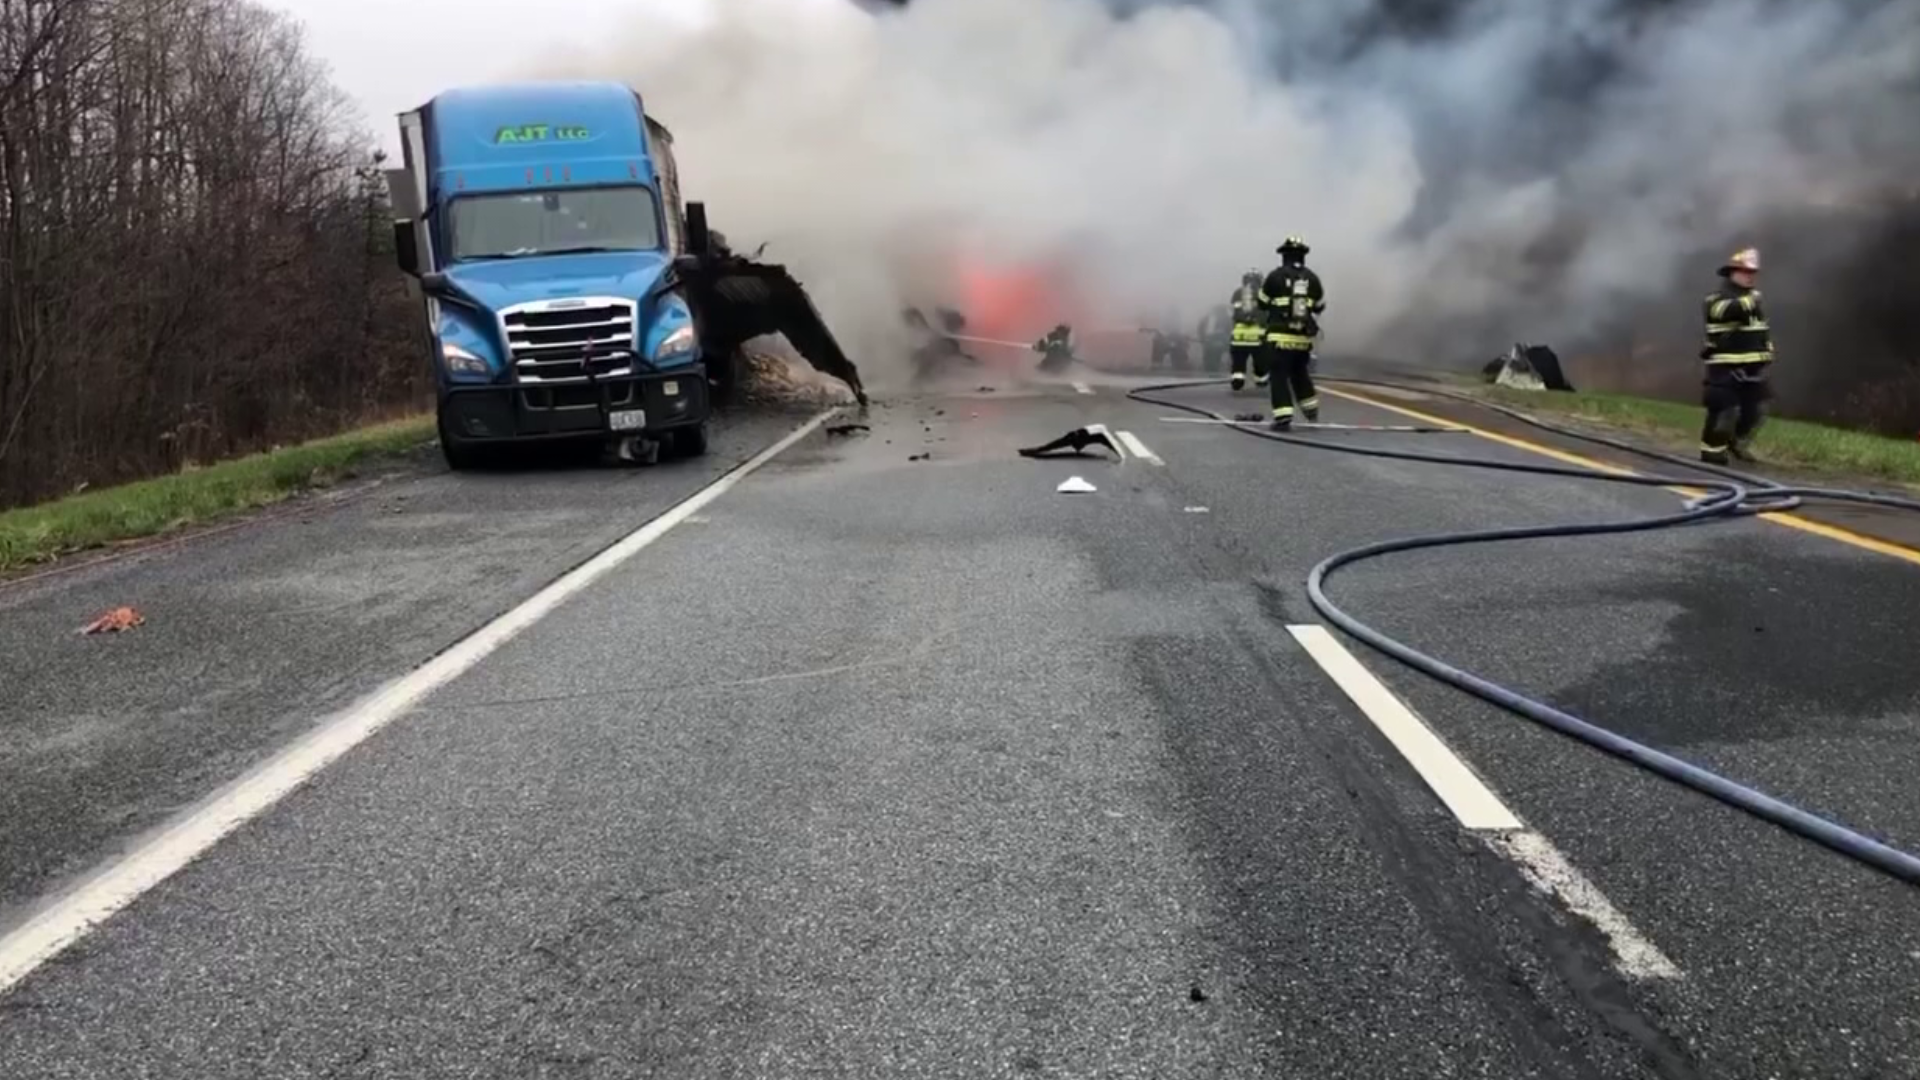 Northbound lanes in Schuylkill County were shut down by a vehicle fire Monday morning.